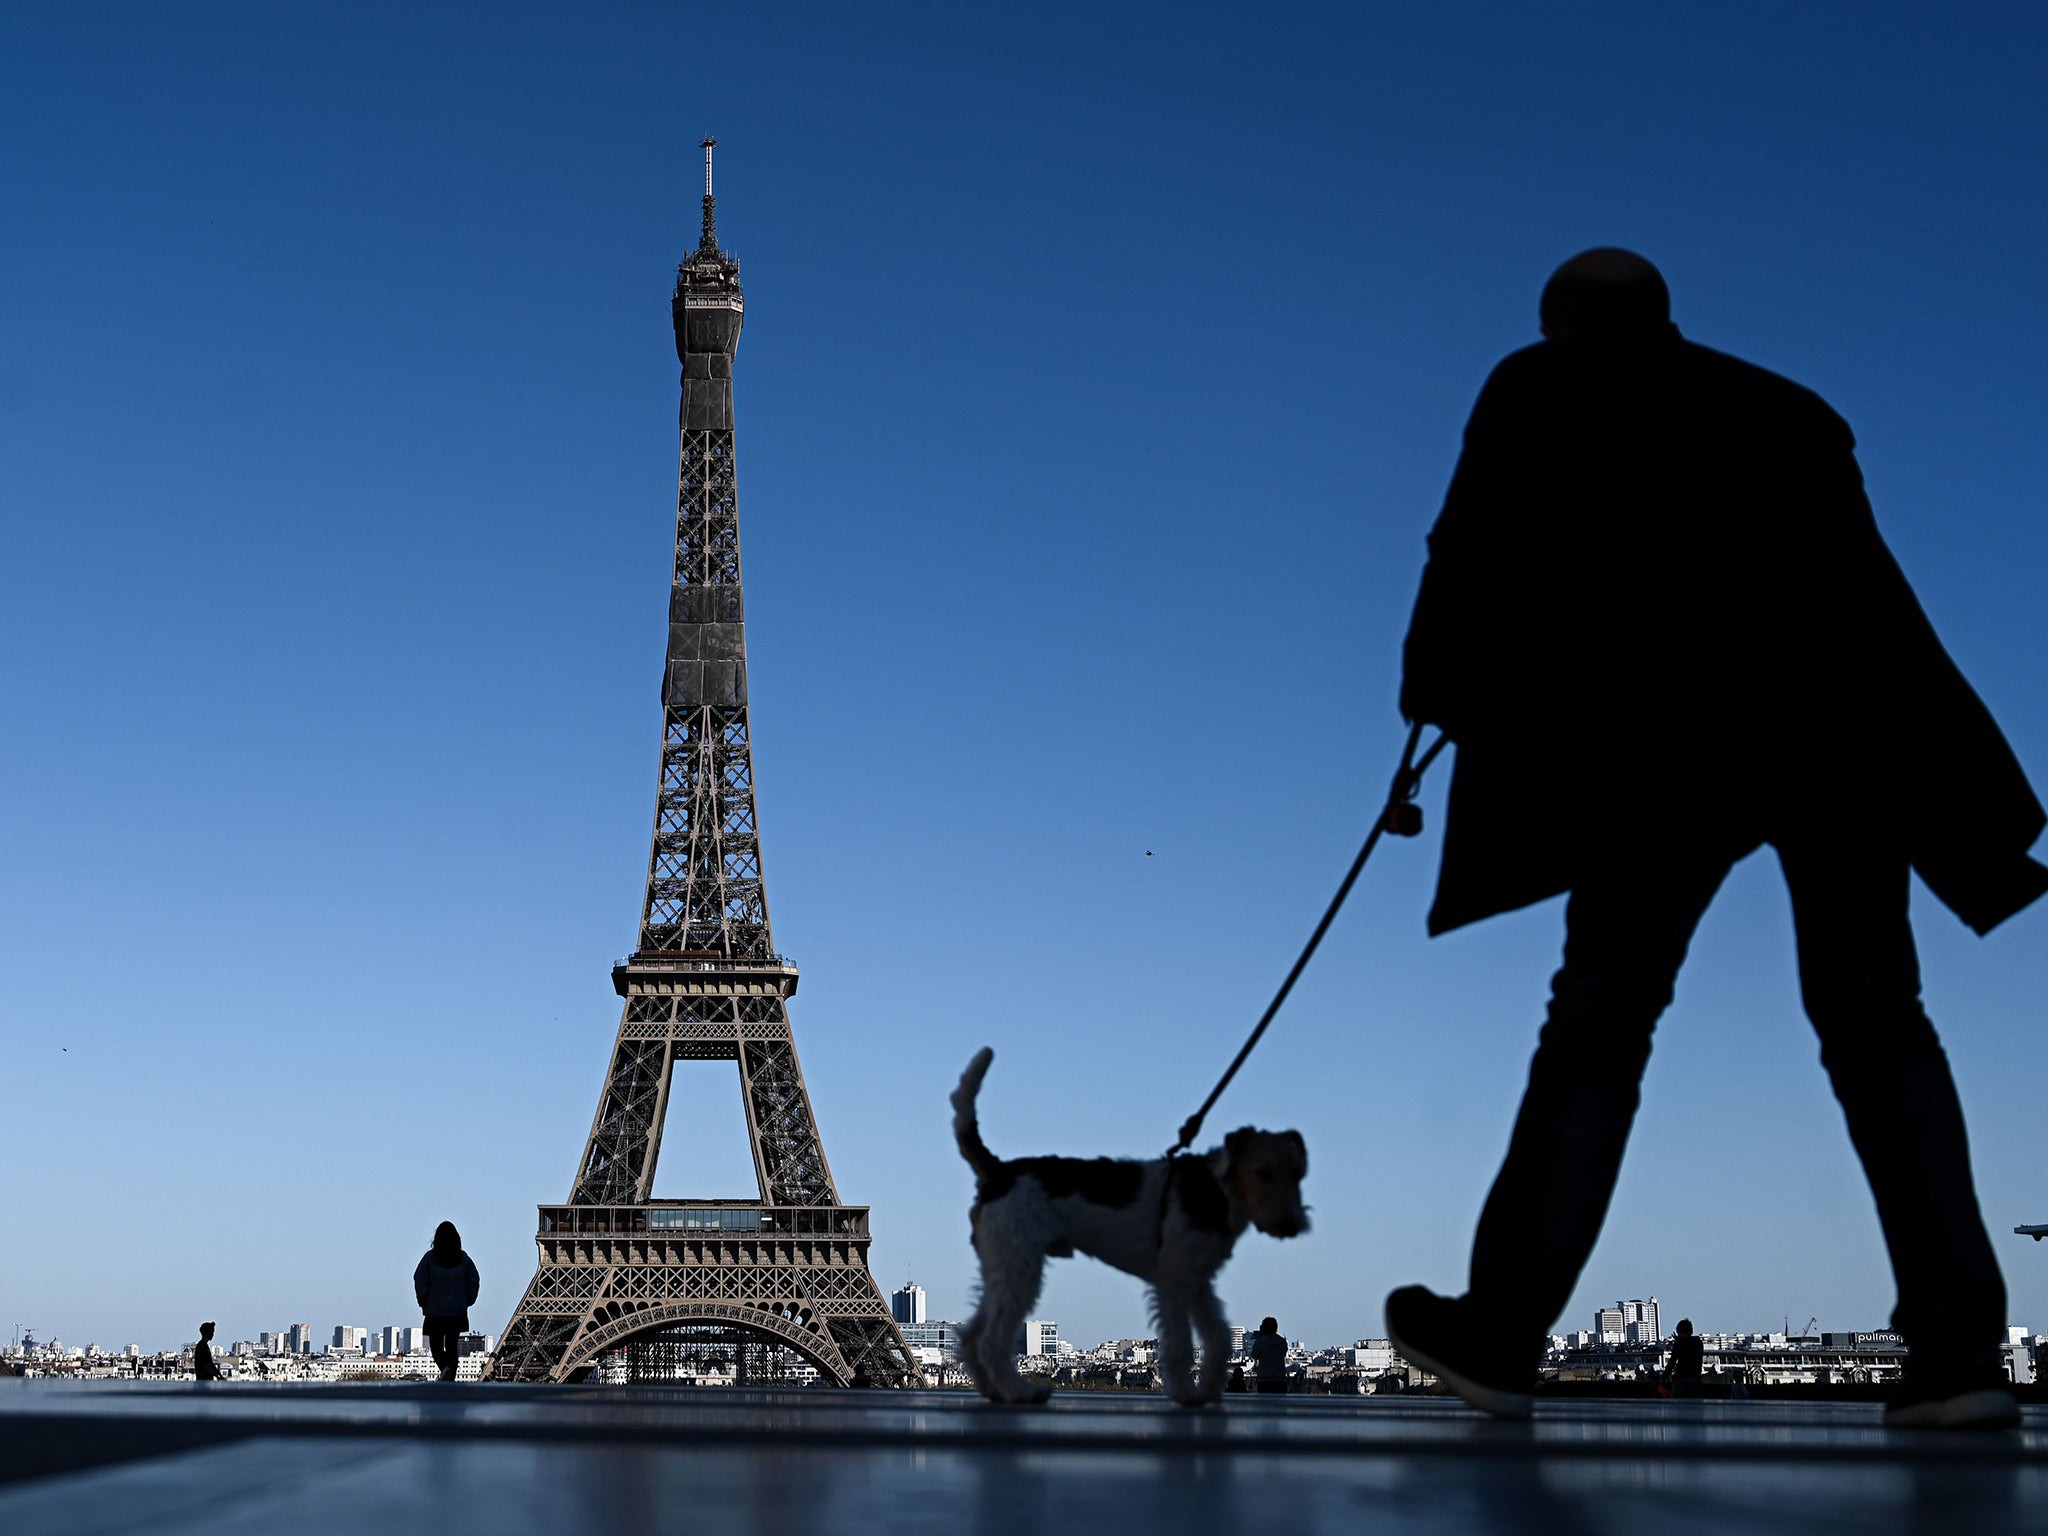 A reader wants to take a furry friend to France next year